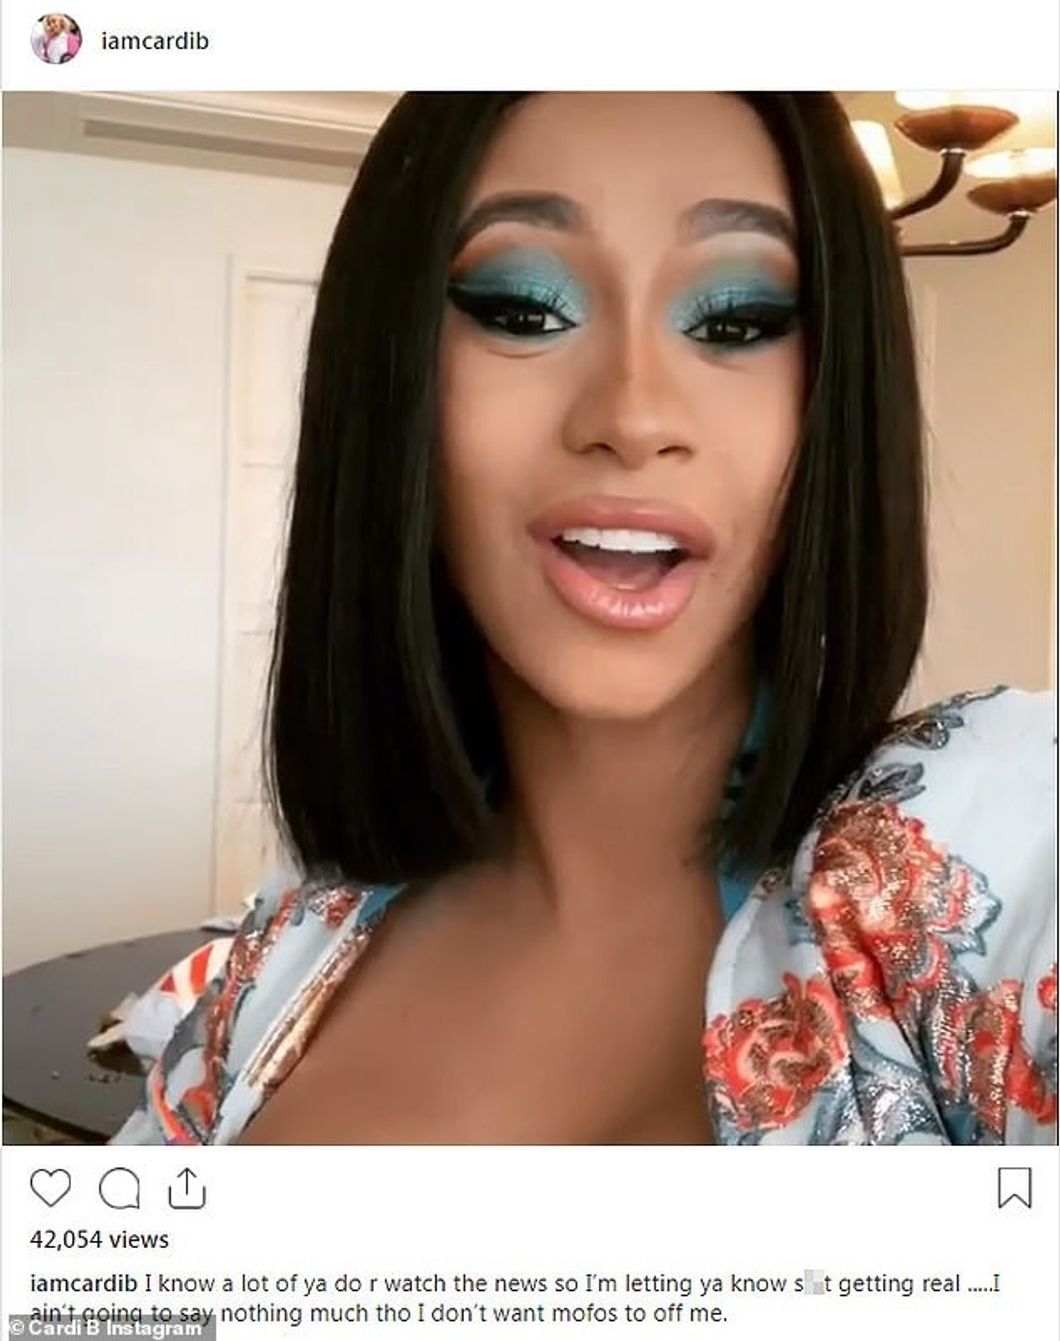 Cardi B’s Rant Inspires Me To Strive For Change For Over 800,000 Workers